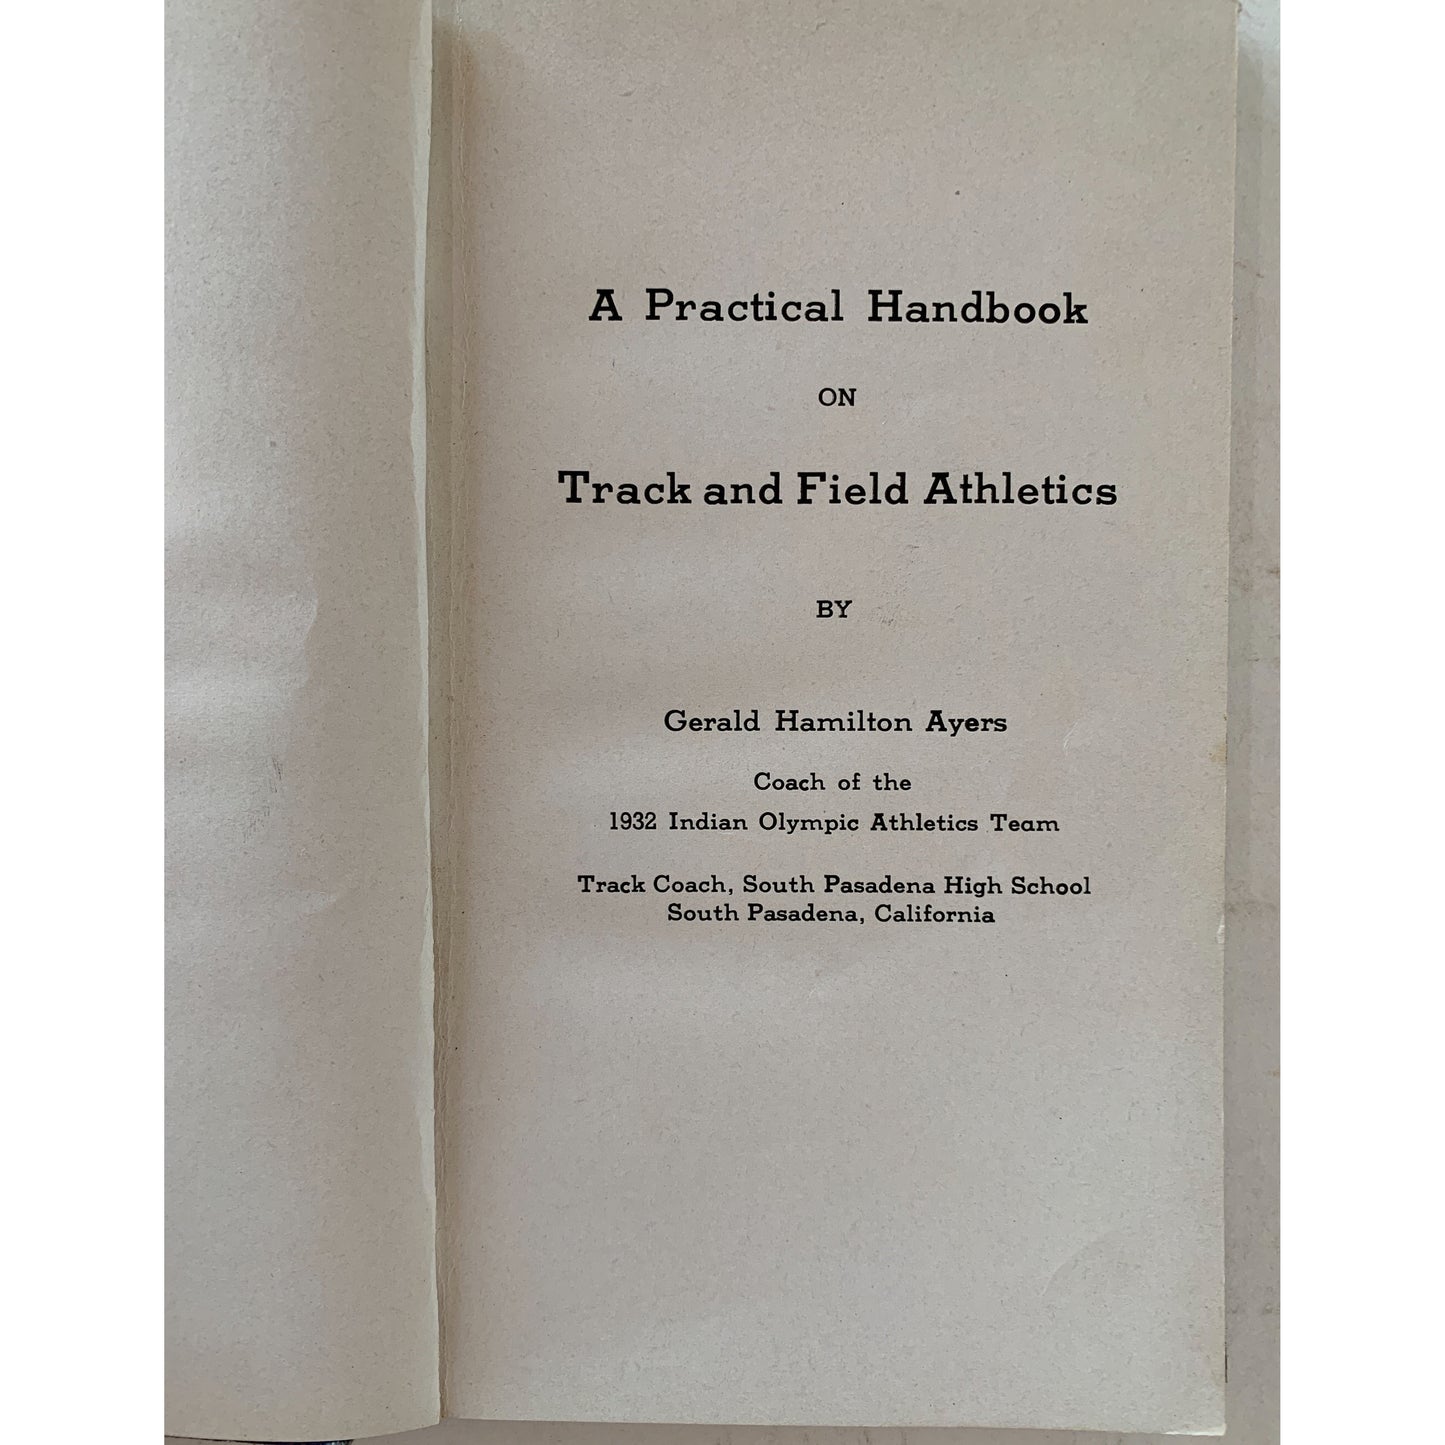 A Practical Handbook on Track and Field Athletics, Gerald Hamilton Ayers, 1933, Rare Hardcover